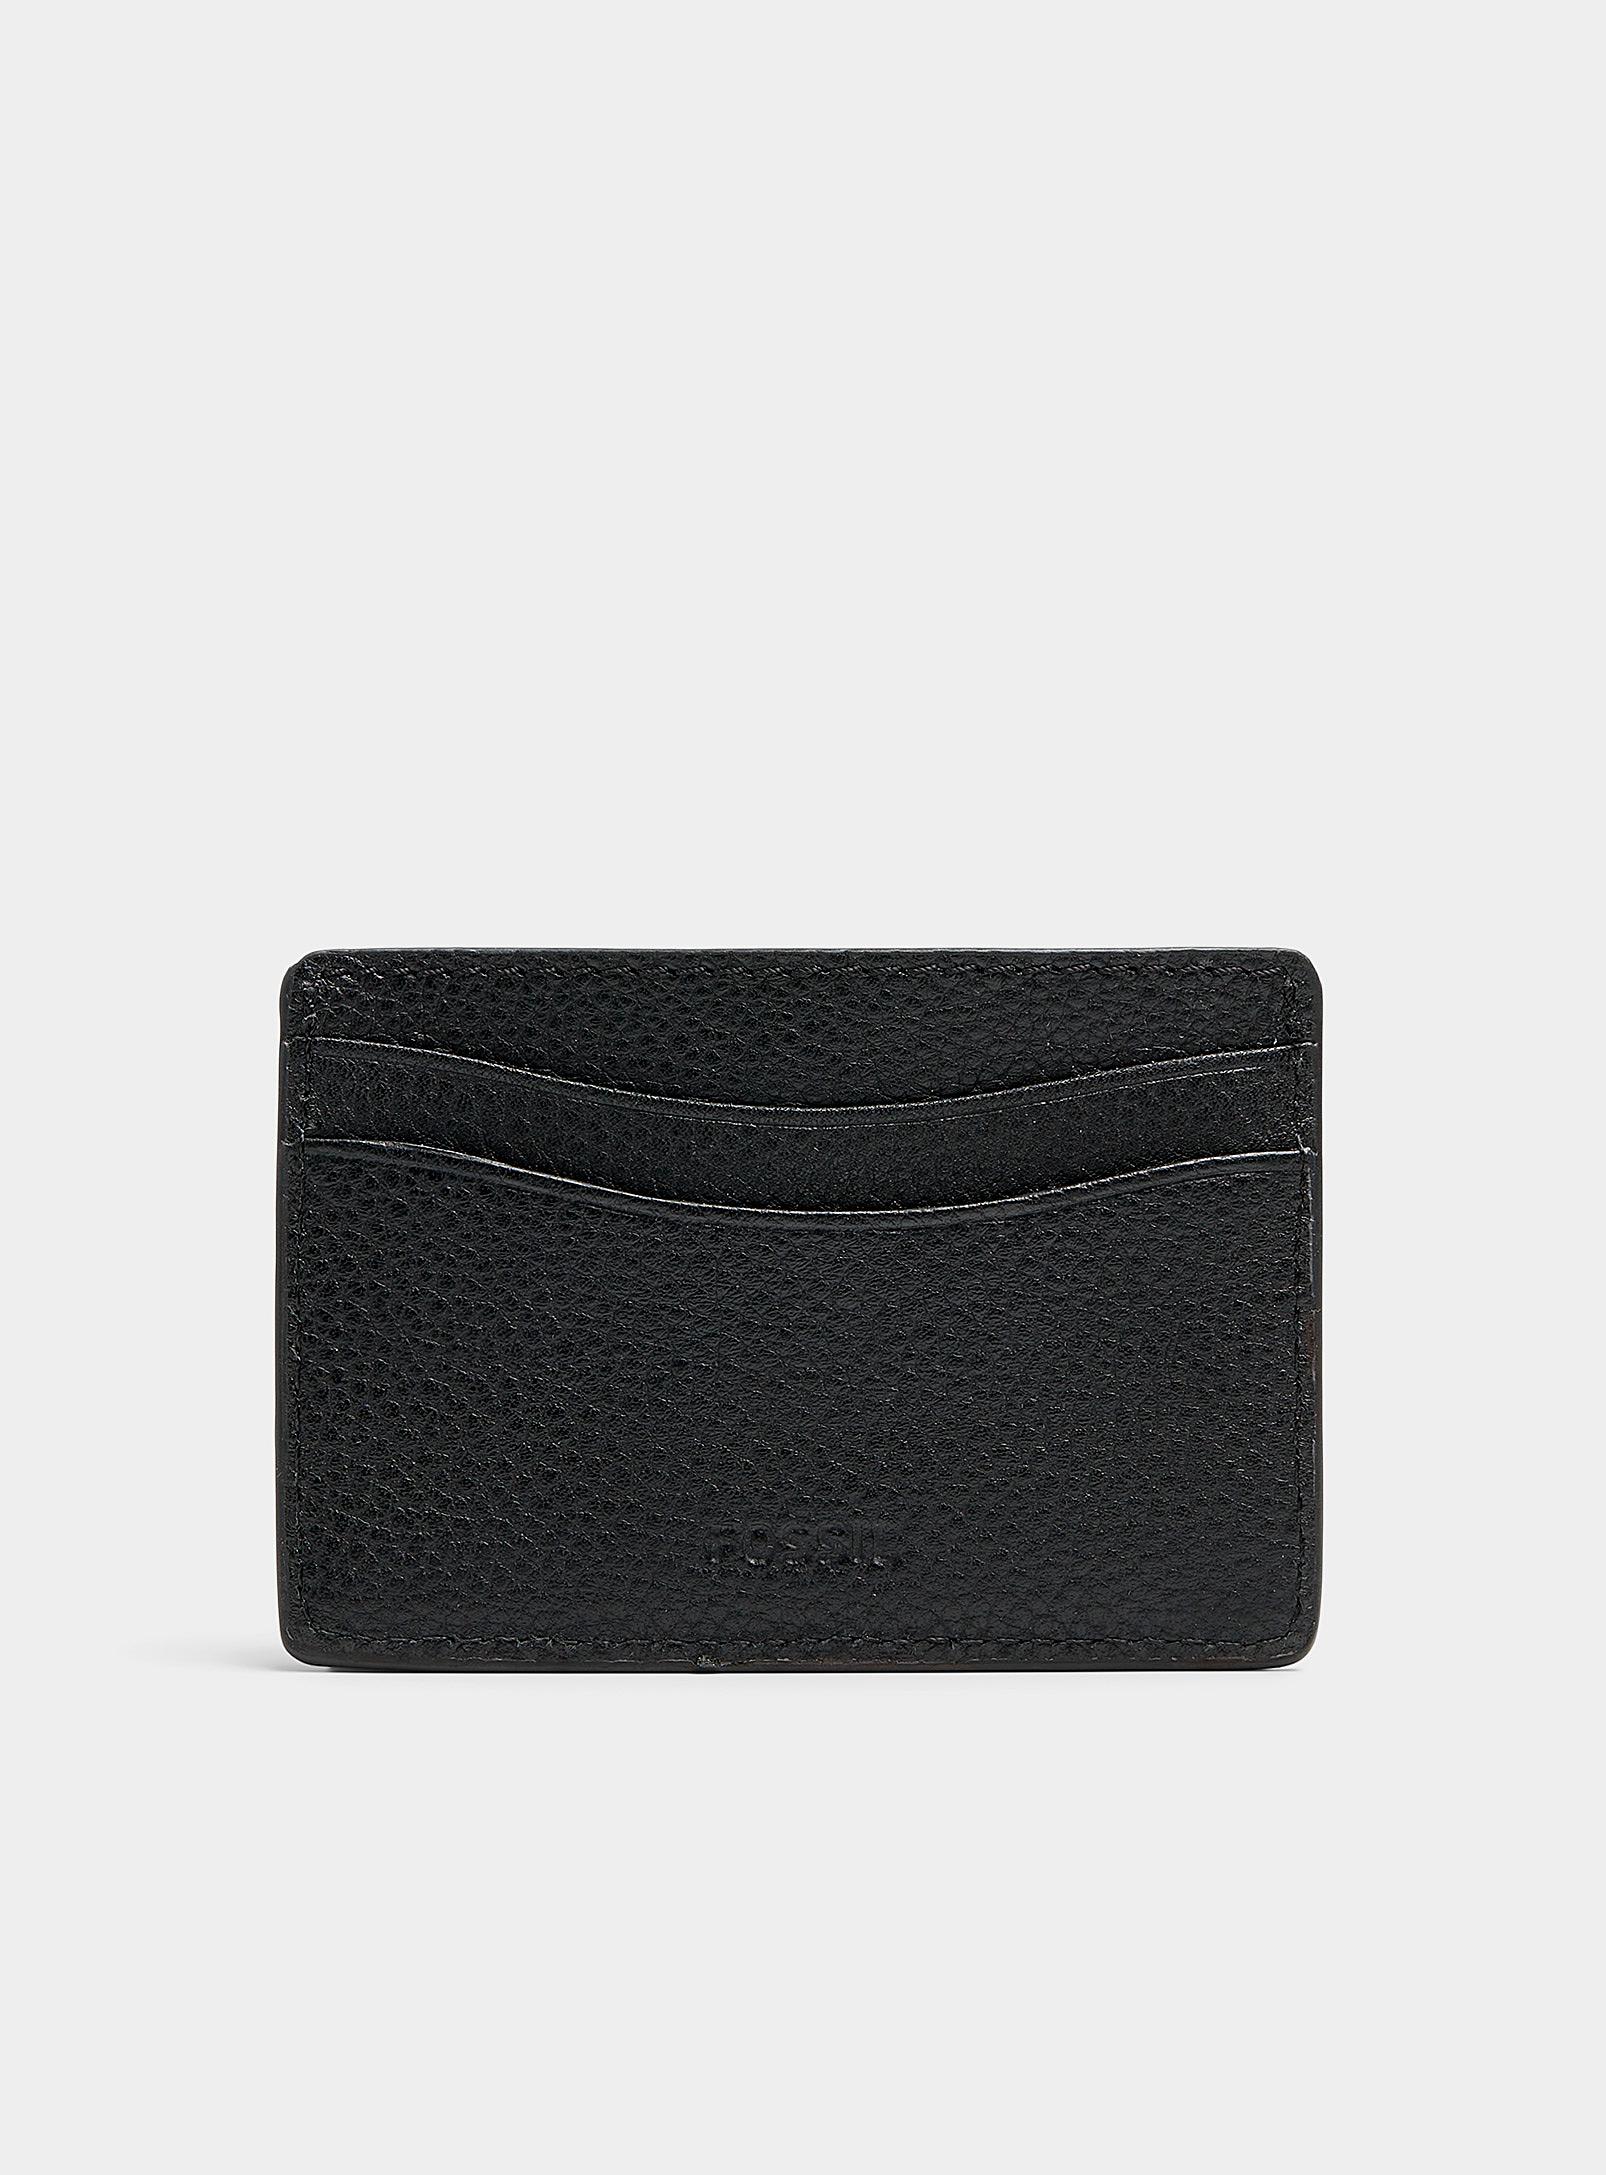 Fossil Anderson Leather Card Holder in Black for Men | Lyst